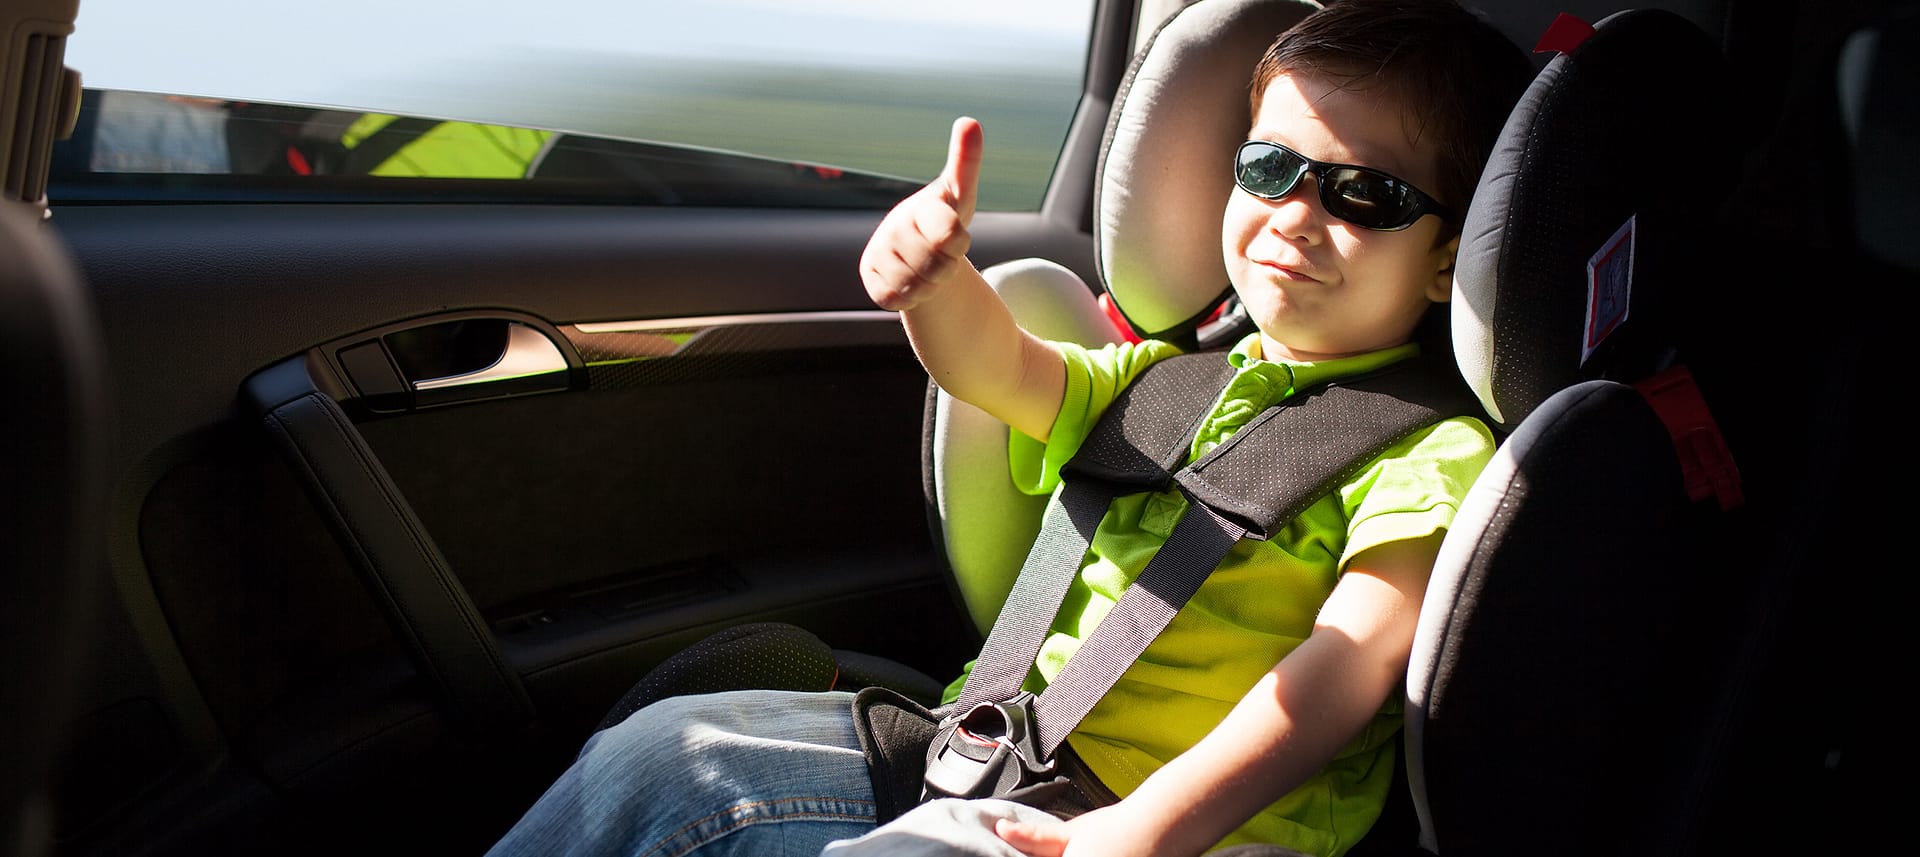 What Is The Florida Seat Belt Law And Defense